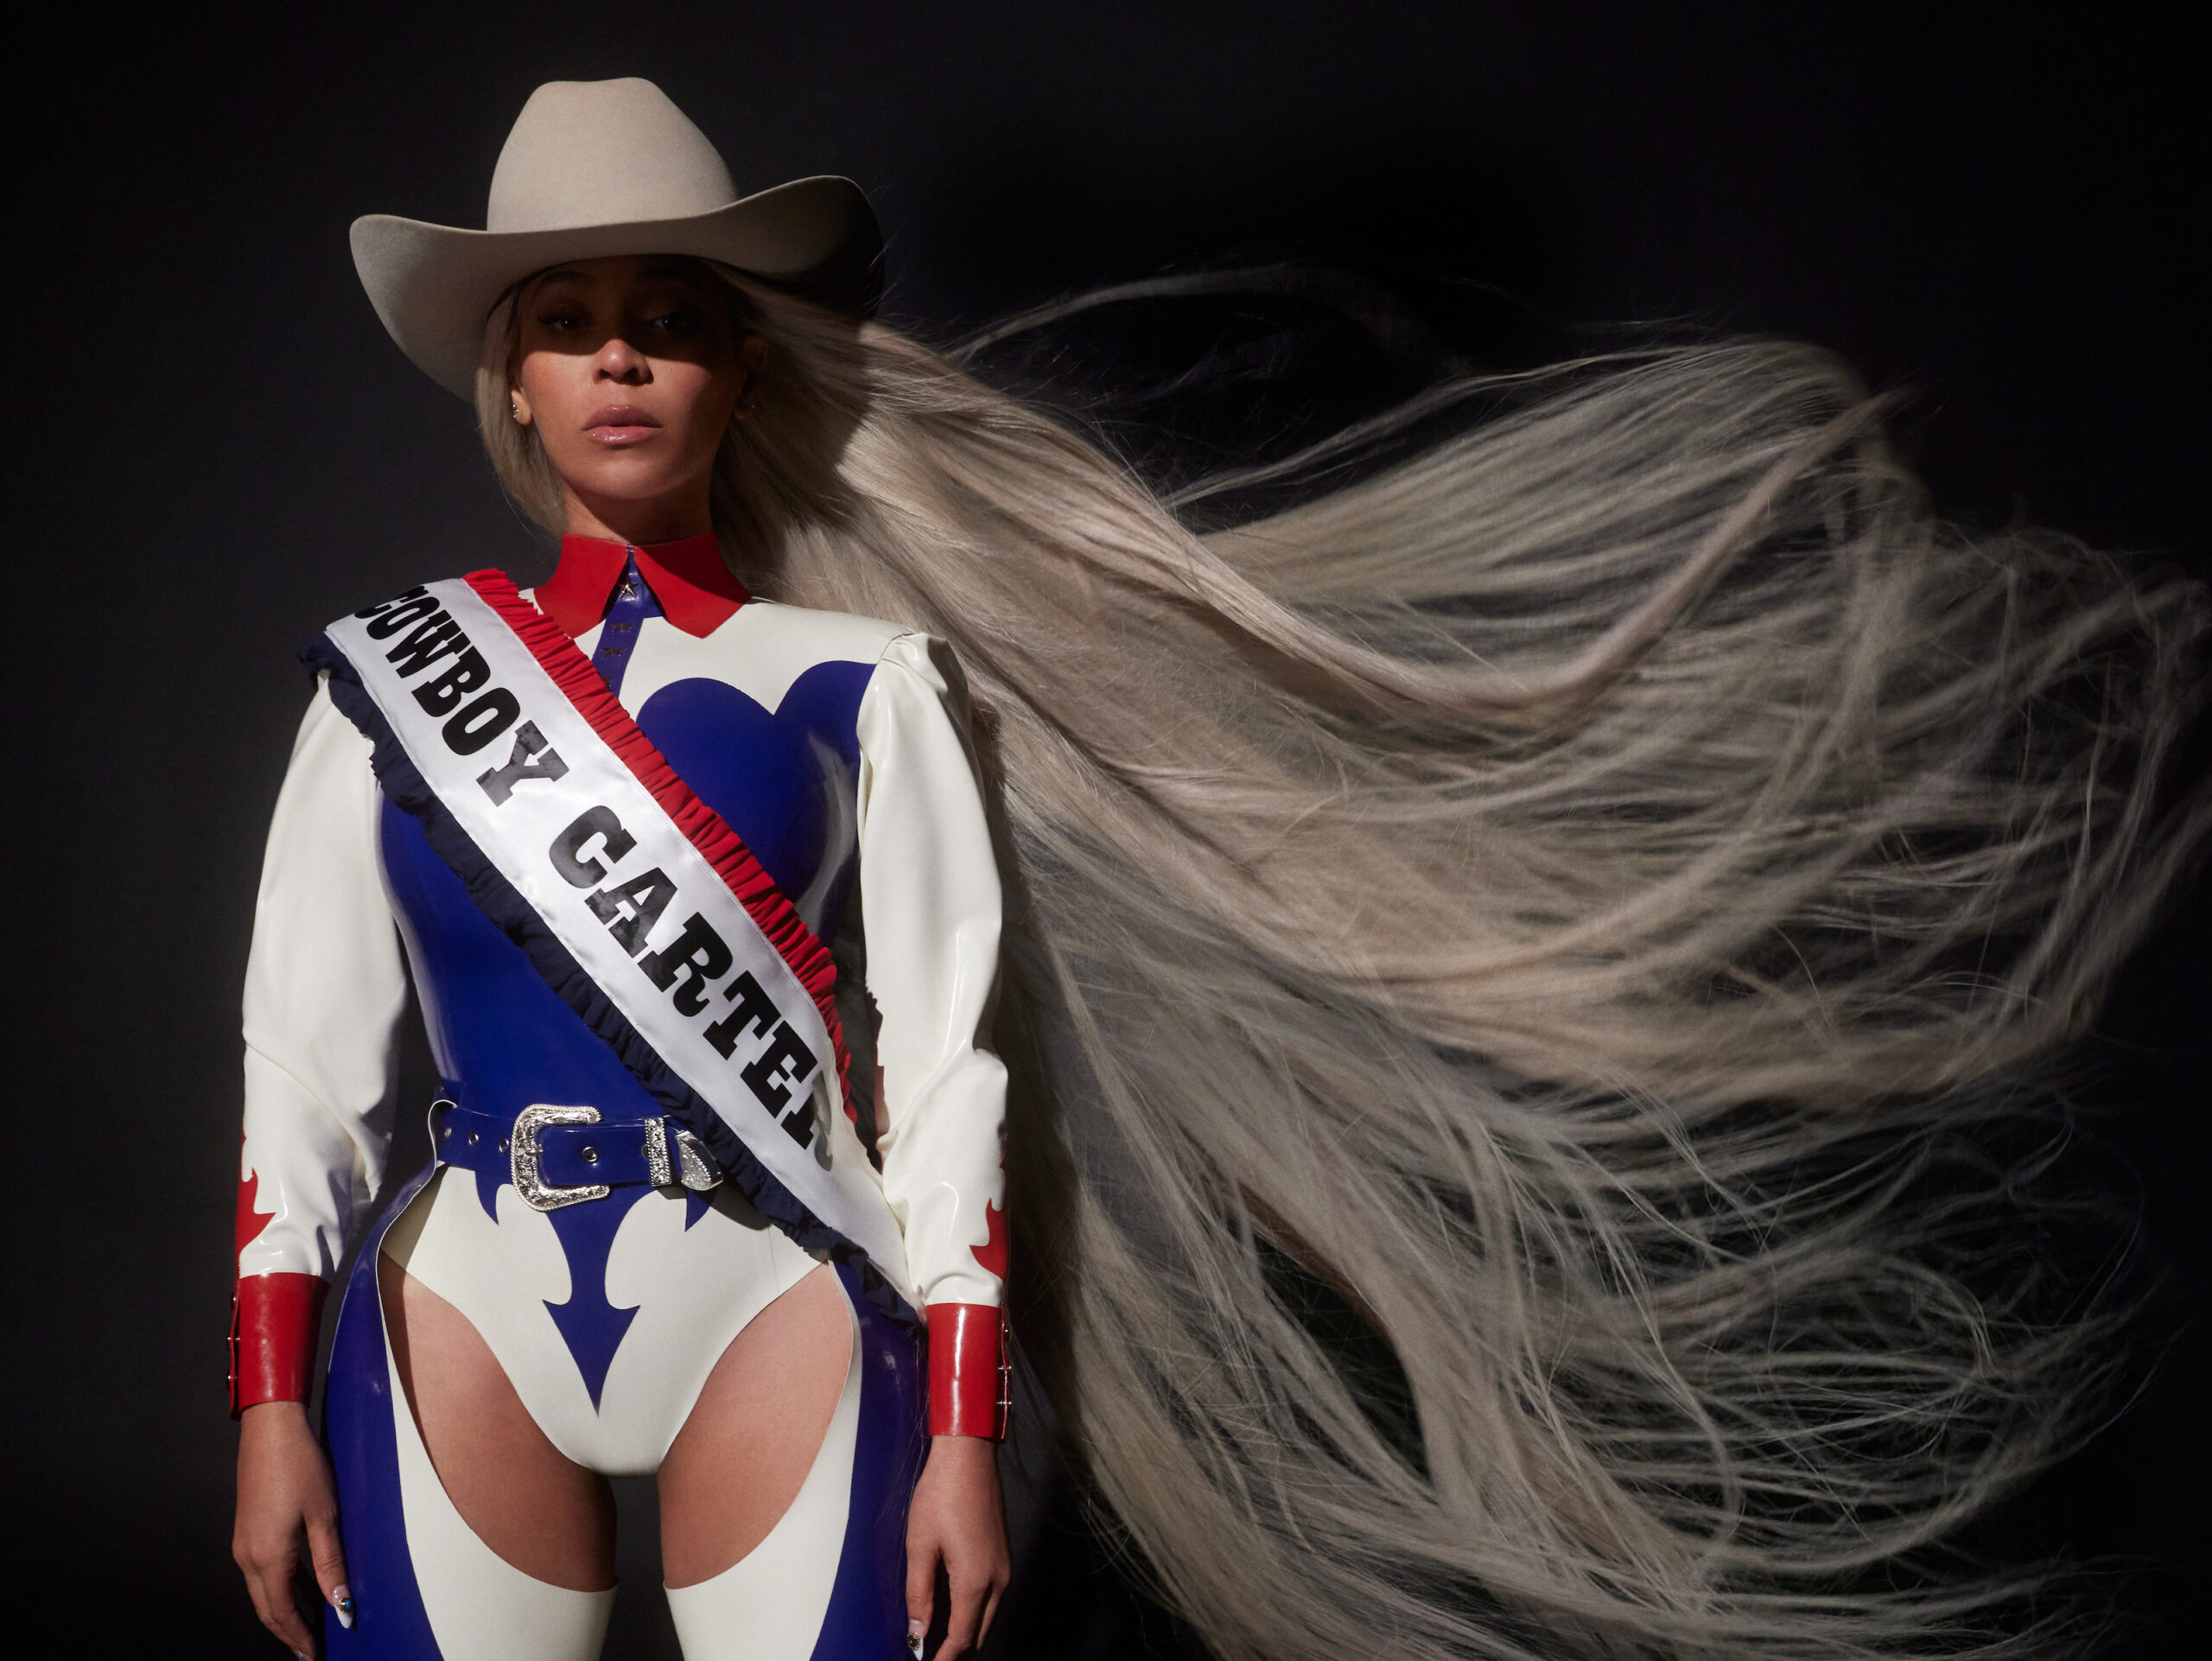 Cowboy Carter is the hotly anticipated follow-up to to Beyoncé's 2022 album, Renaissance.